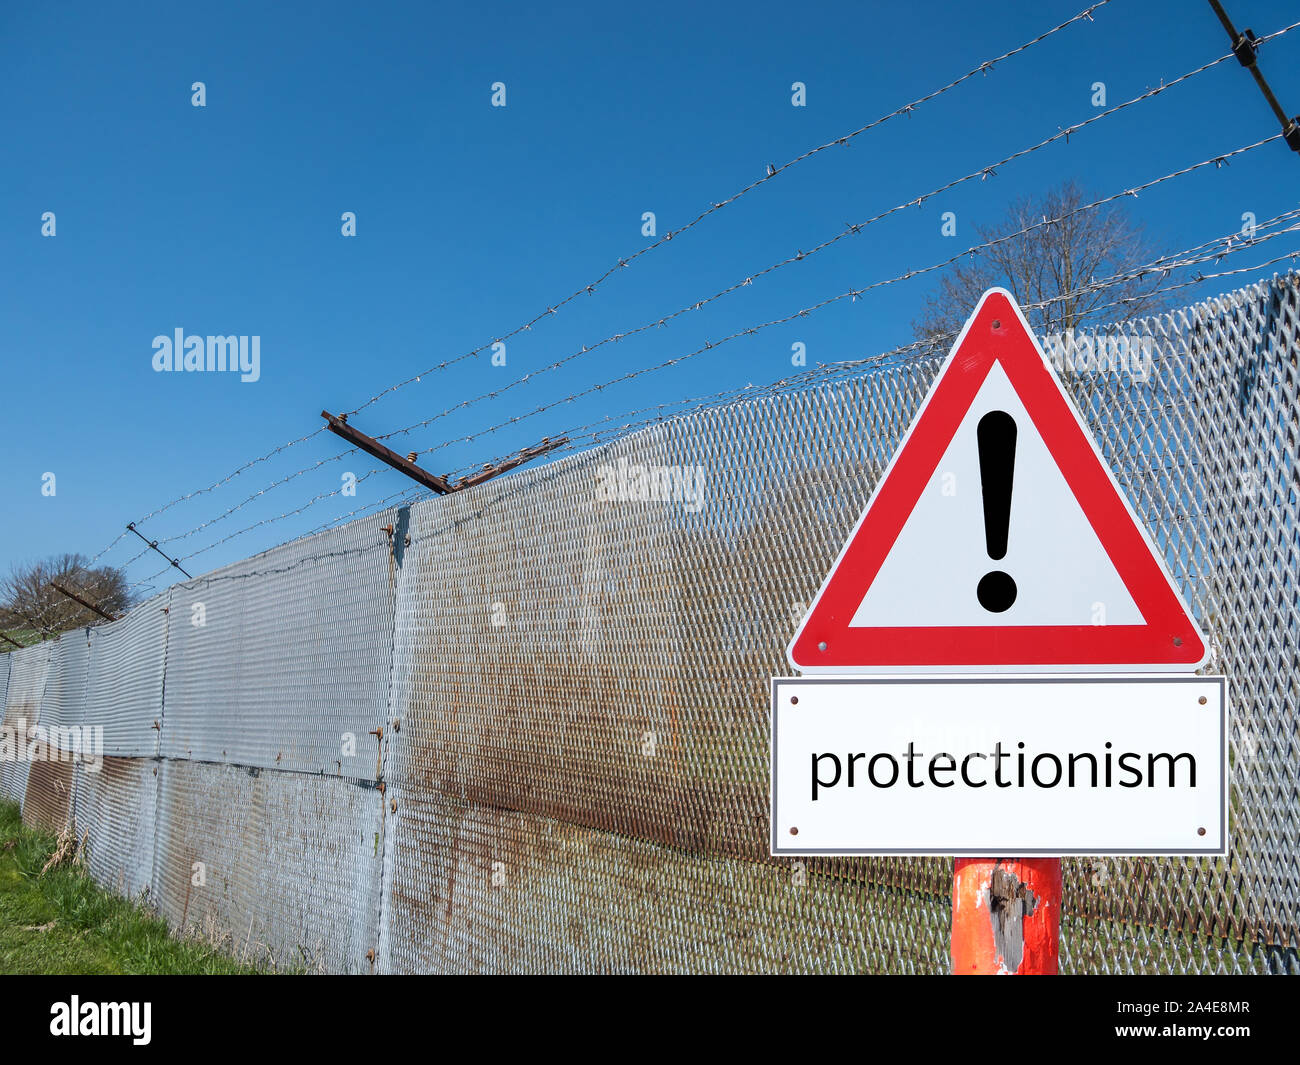 Border fence with warning sign protectionism Stock Photo